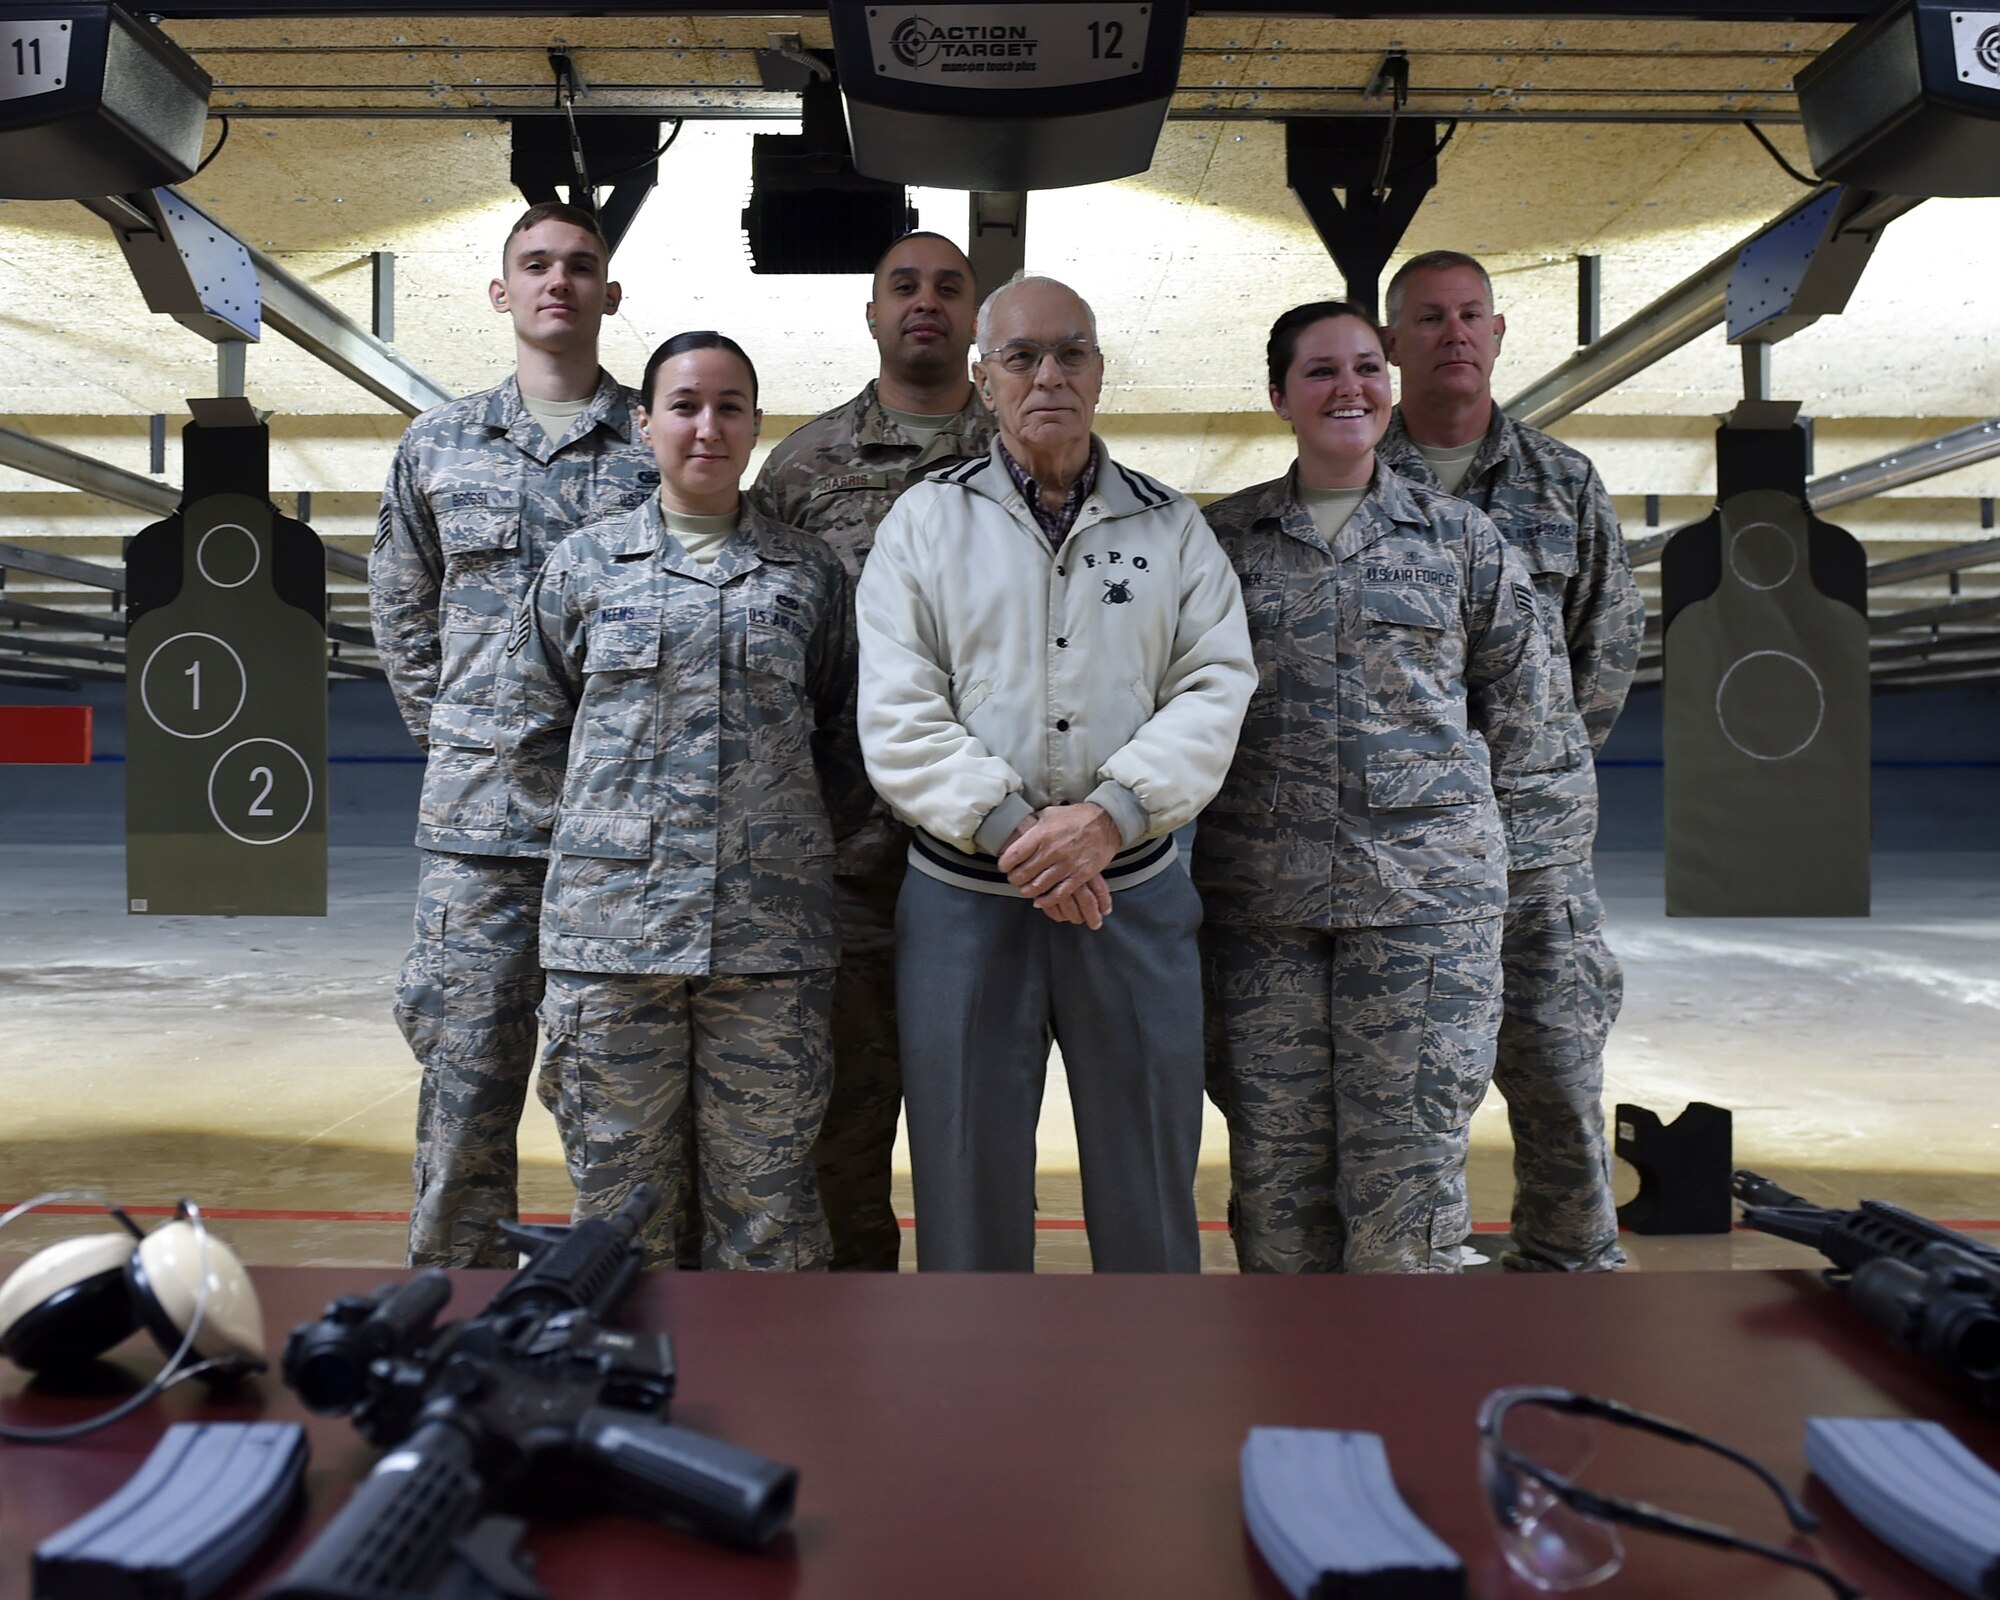 Five 910th Airlift Wing Reserve Citizen Airmen that were chosen to fire the ceremonial first shots at the new firing range.